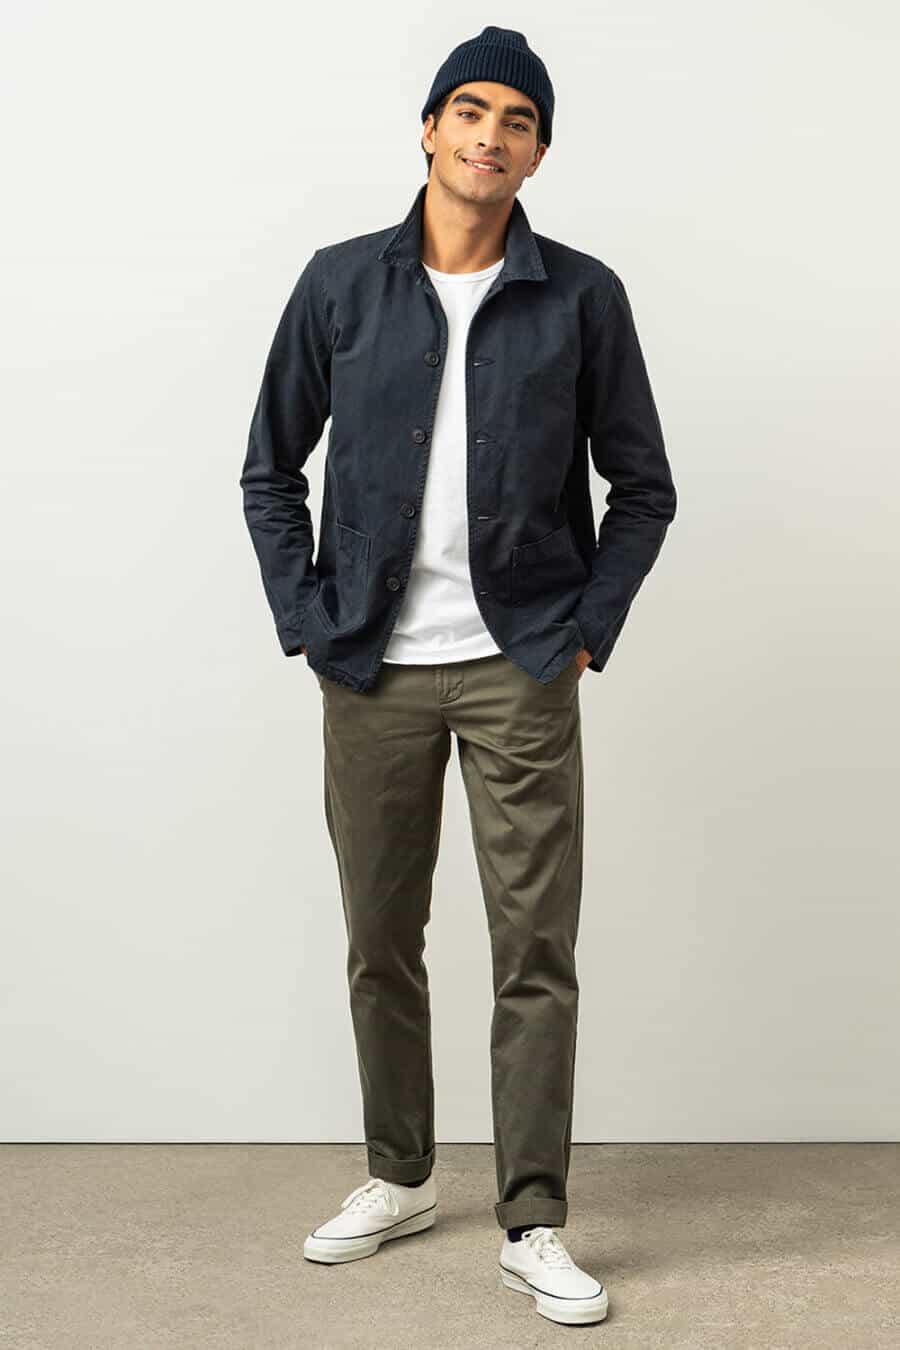 Men's green pants, white T-shirt, navy chore jacket and white sneakers outfit